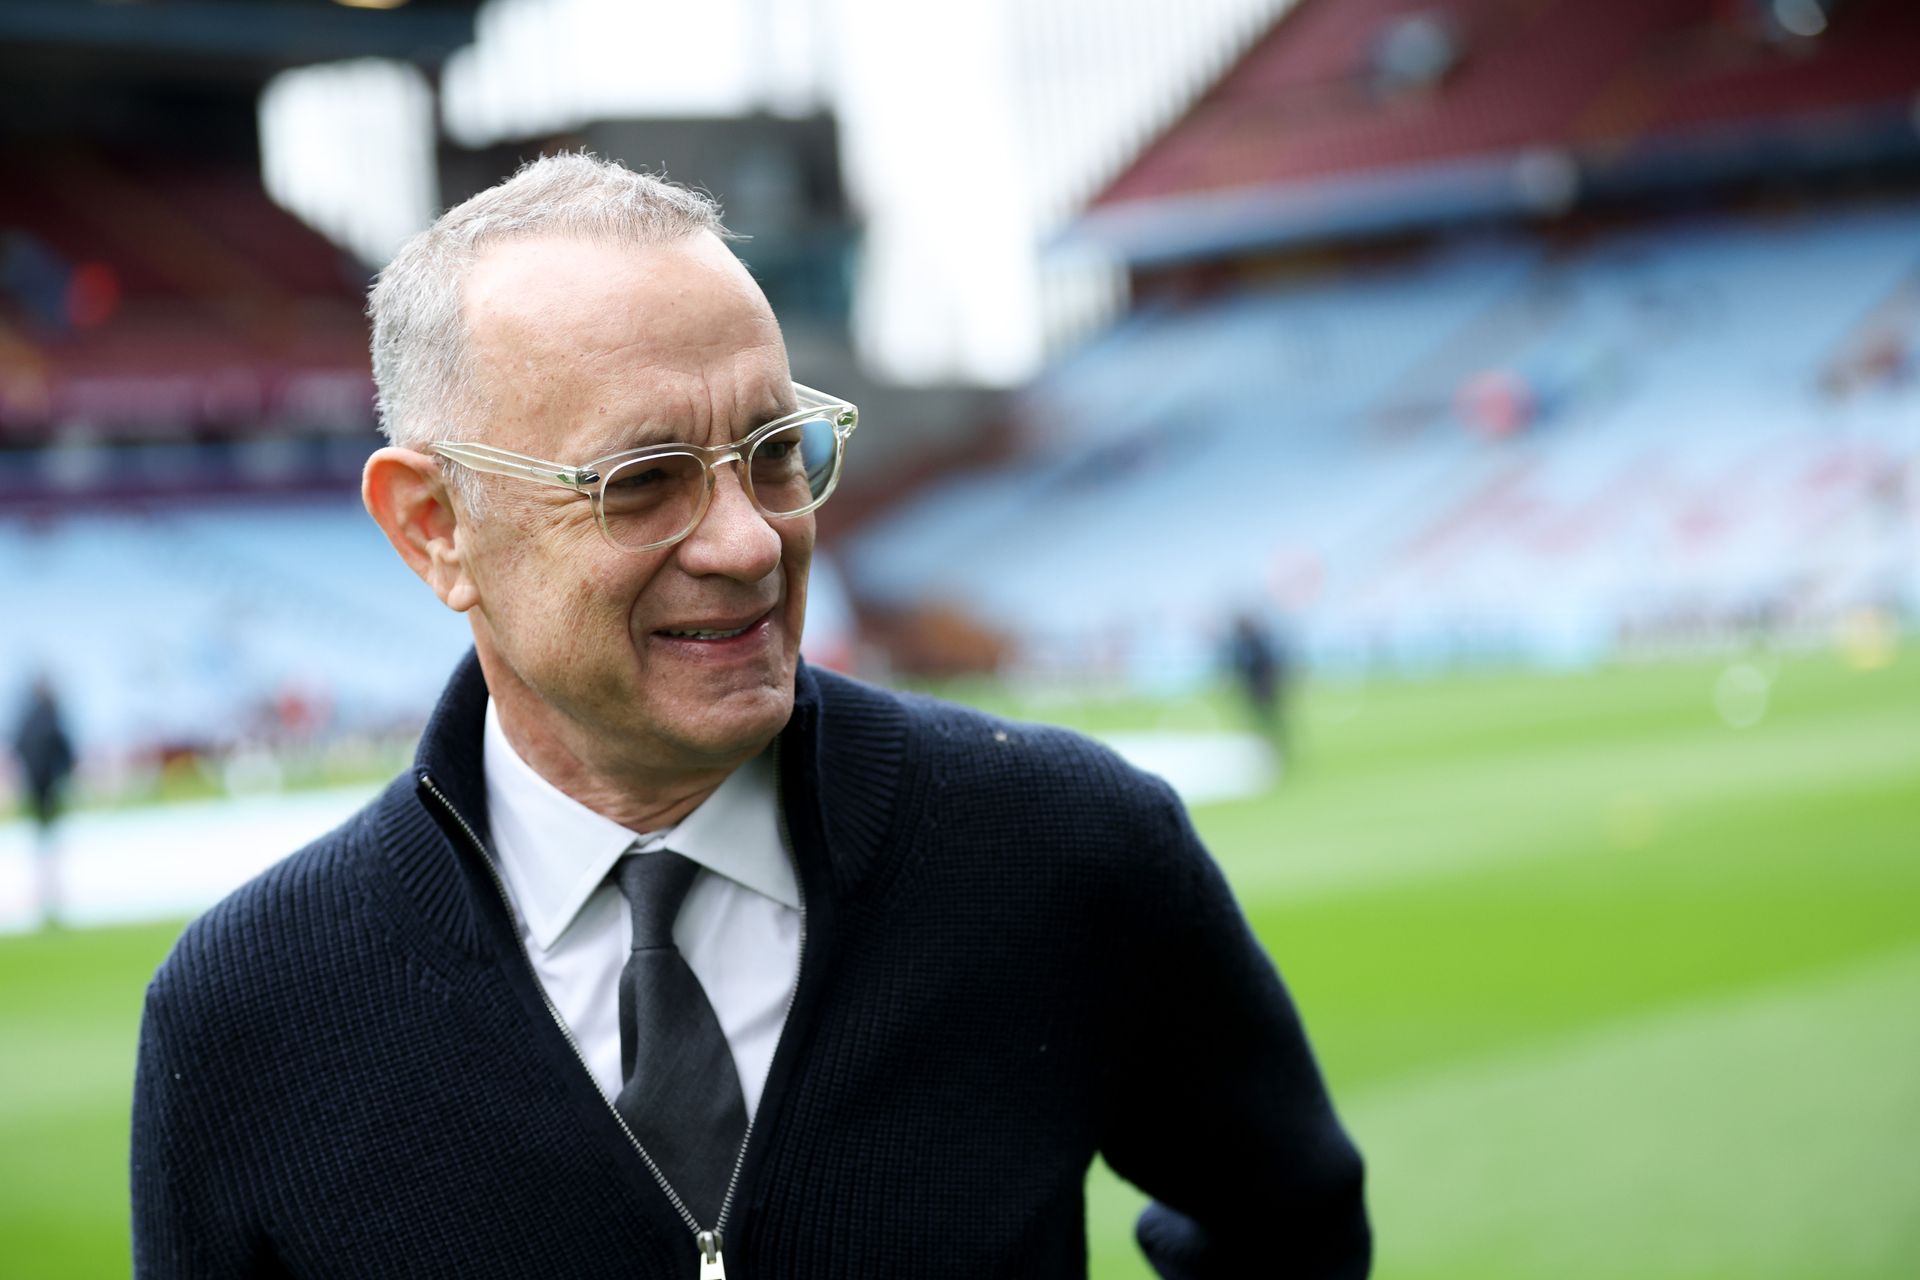 <p>                     Tom Hanks held up an Aston Villa scarf at the premiere of his film Charlie Wilson's War in 2008 and later spoke of how he was attracted to the Birmingham club due to it's old-worldly name.                   </p>                                      <p>                     Hanks spoke of his affection for Aston Villa on James Corden’s Late Late Show in 2019 and finally made it to Villa Park in February 2023, mixing with players, staff and supporters ahead of a 4-2 loss to Arsenal.                   </p>